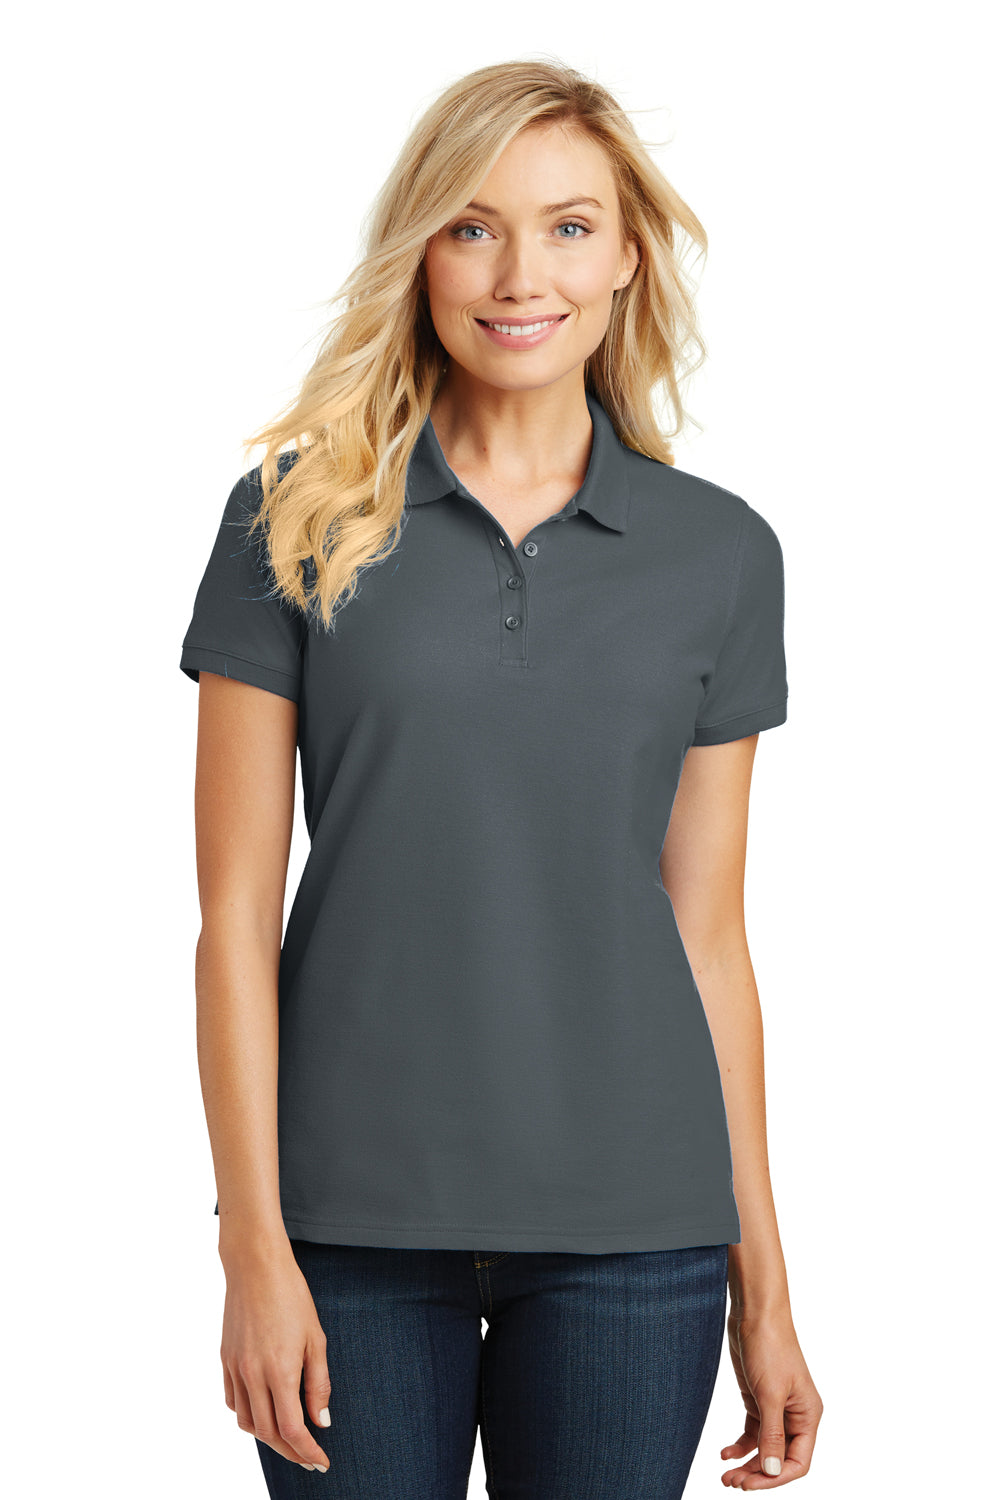 Port Authority L100 Womens Core Classic Short Sleeve Polo Shirt Graphite Grey Front